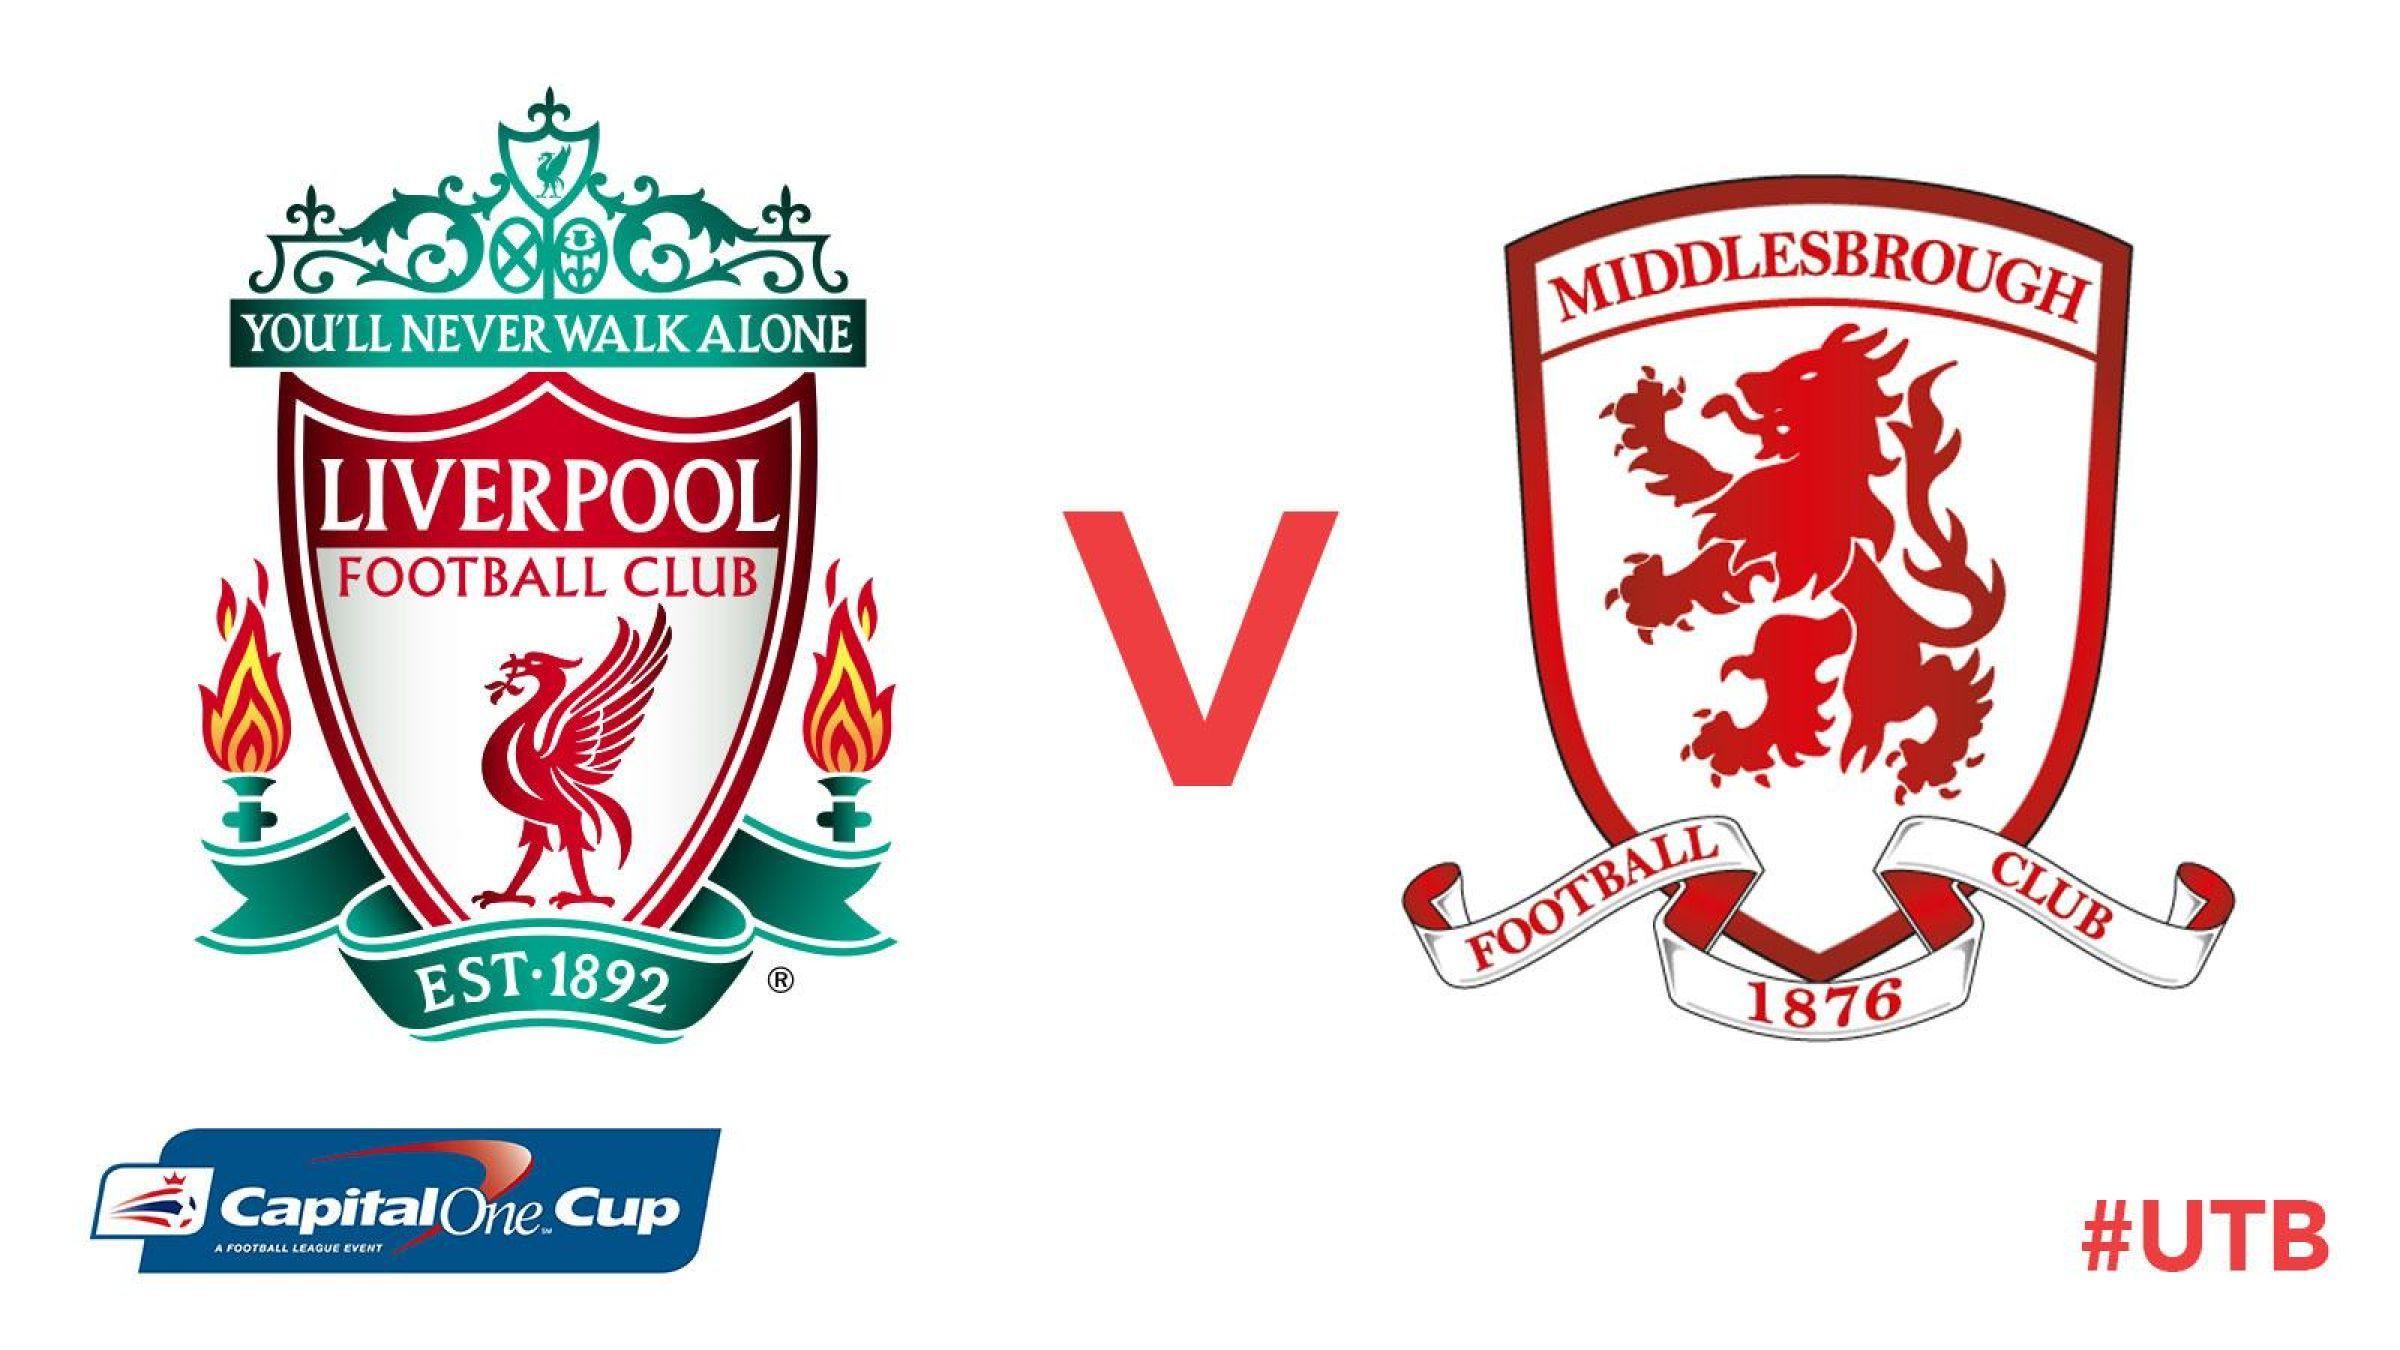 Liverpool Logo - Ticket information for Middlesbrough's Capital One Cup tie at